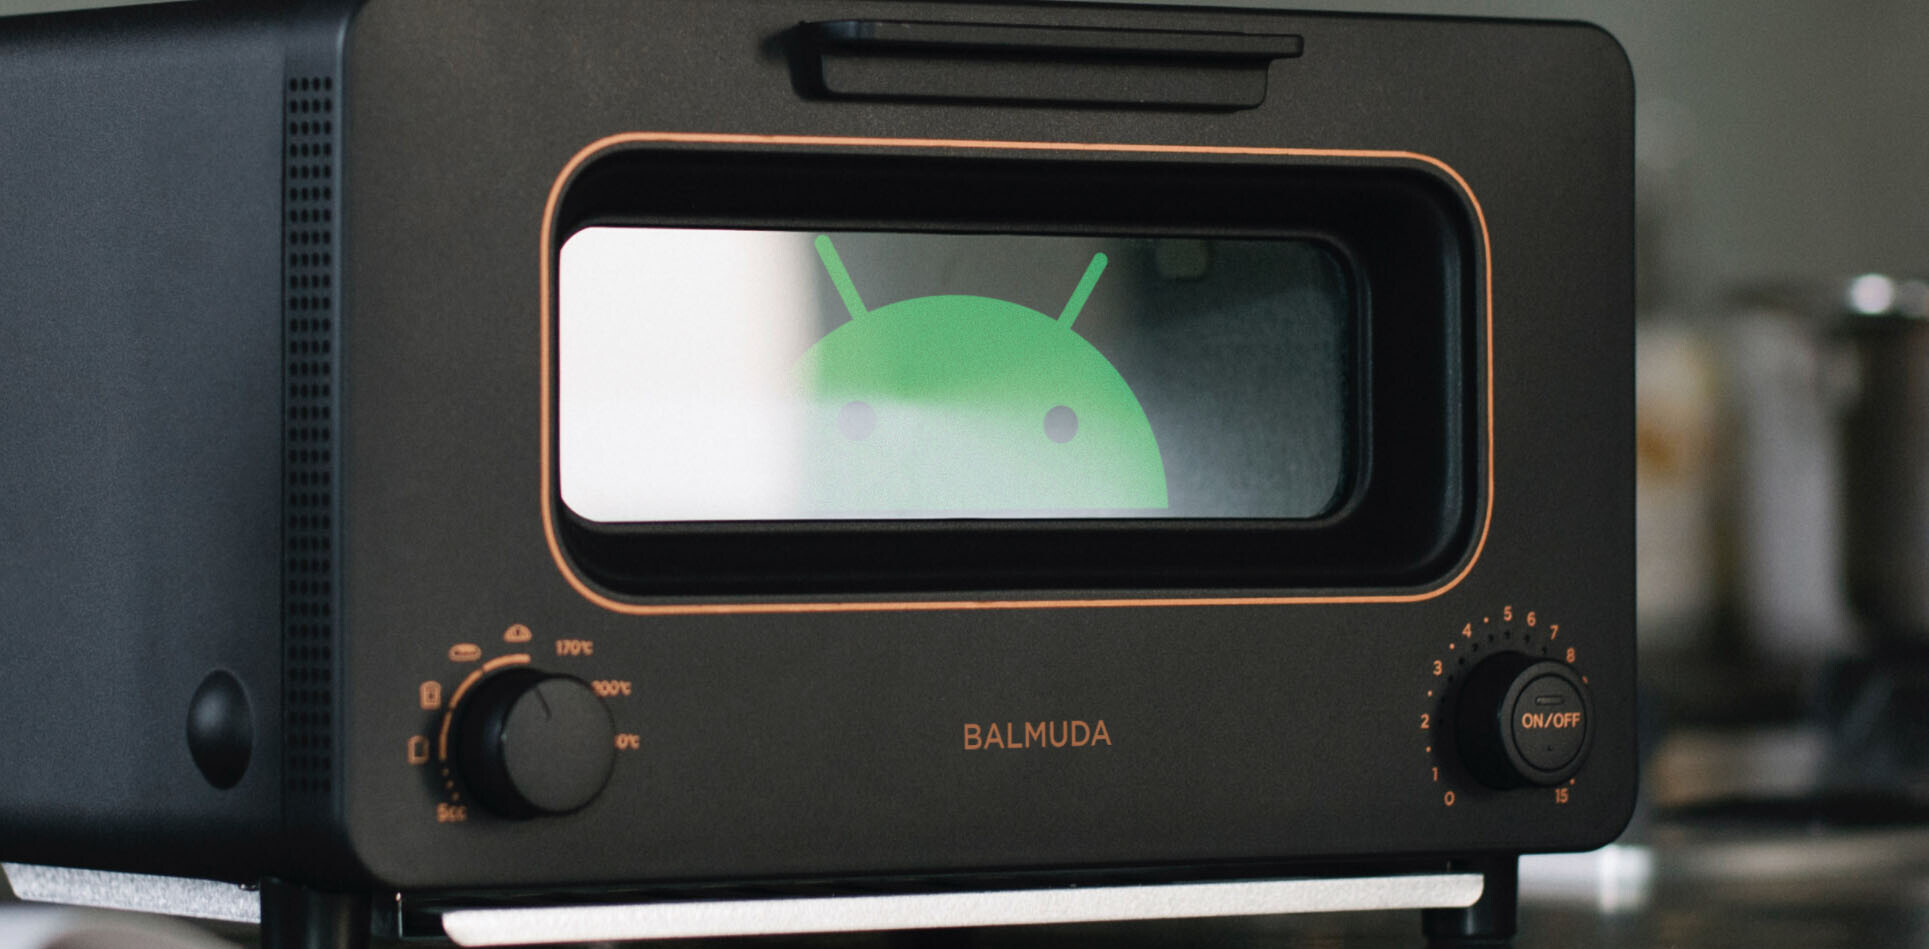 Fancy toaster company Balmuda is making an Android phone